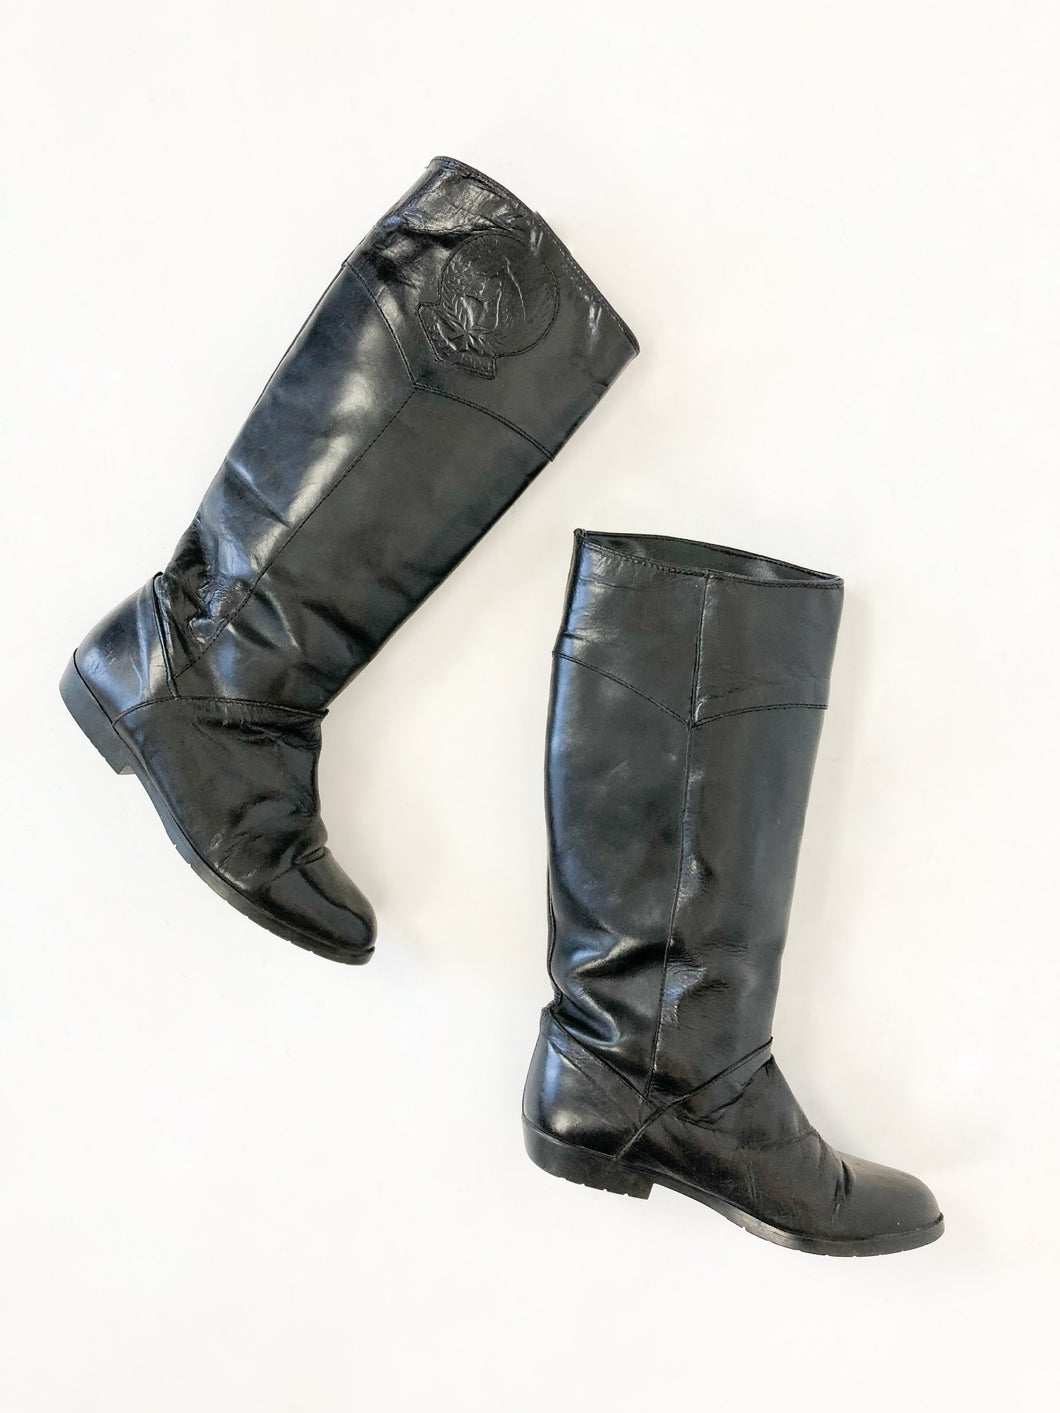 Vintage 80s Ascot 1908 Black Leather Equestrian Riding Boots Size 7